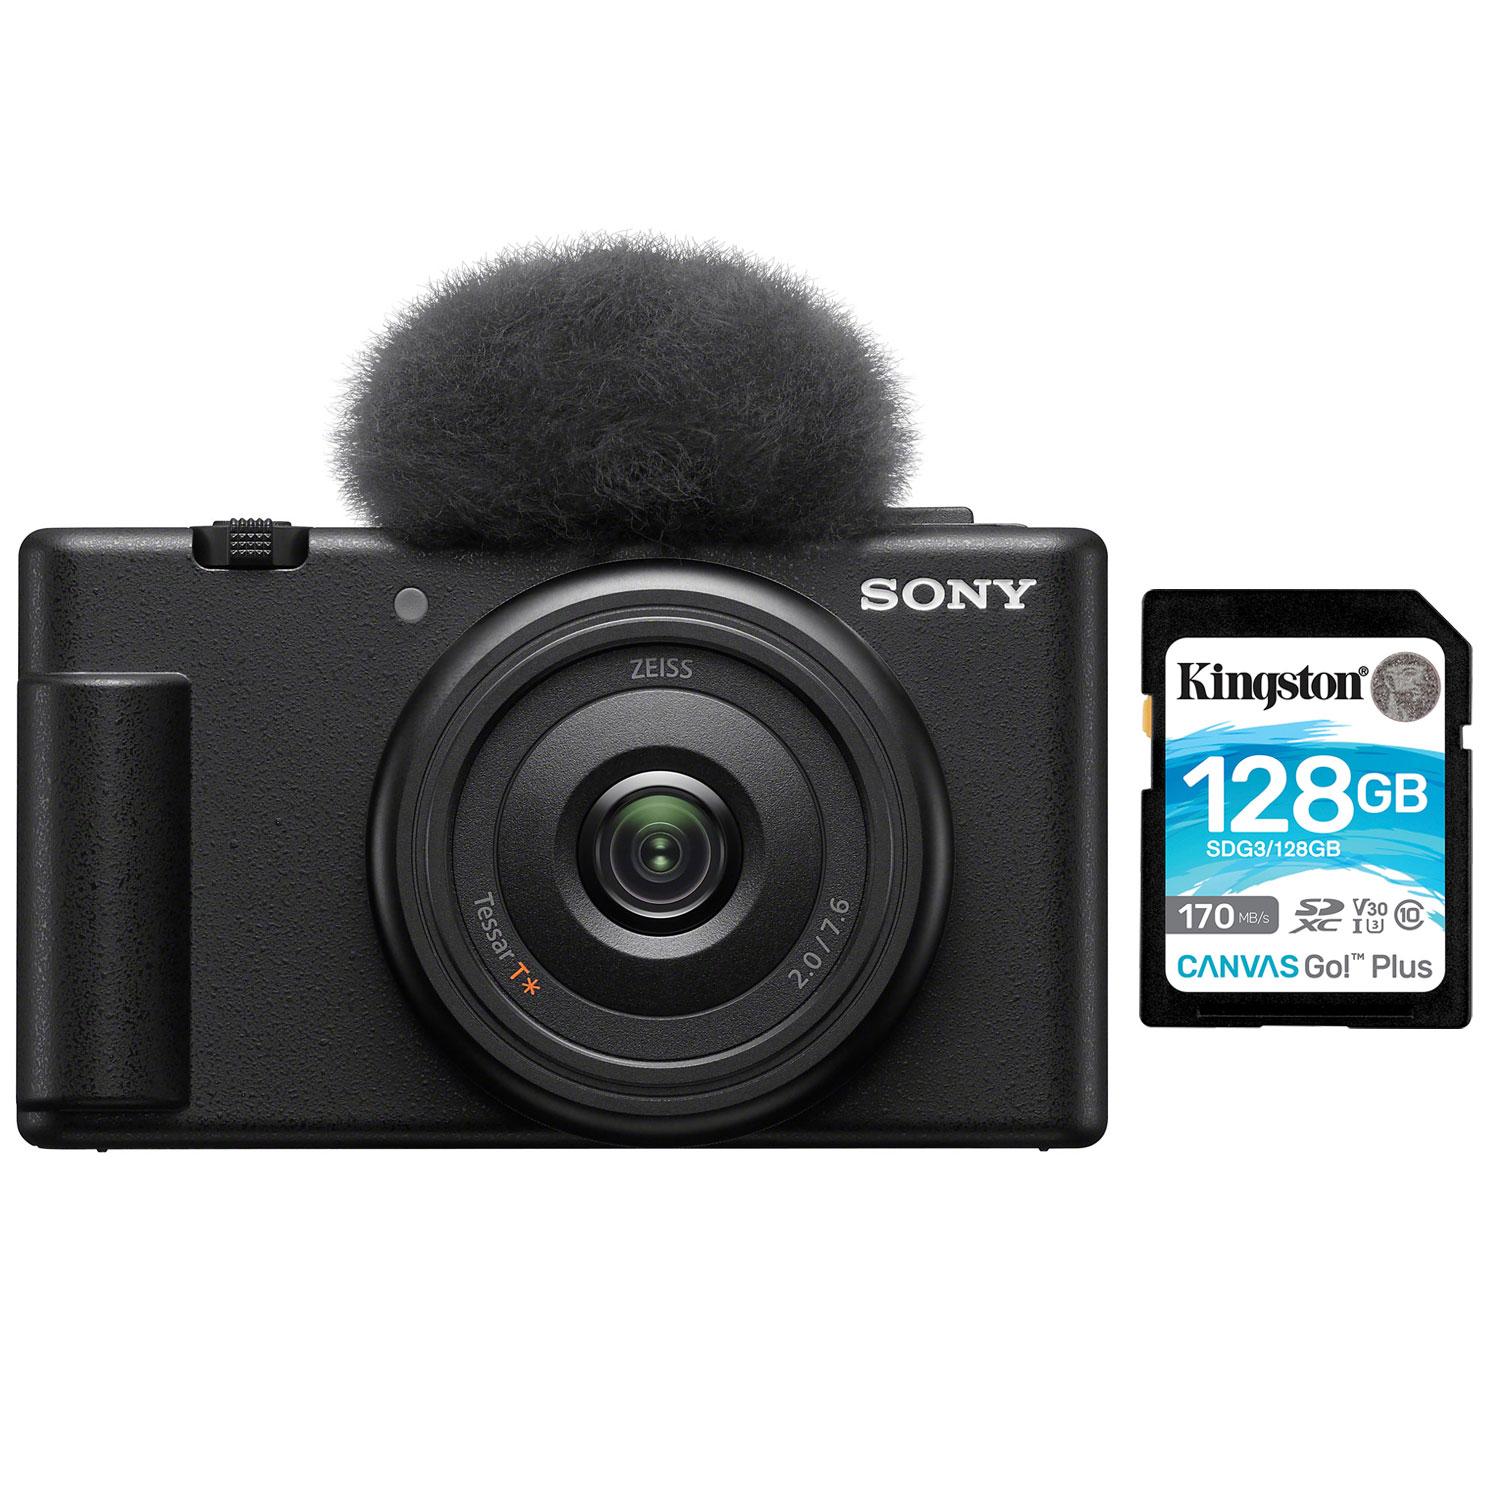 Sony ZV-1F Content Creator Vlogger 20.1MP Digital Camera with 128GB 170MB/s SDXC Memory Card